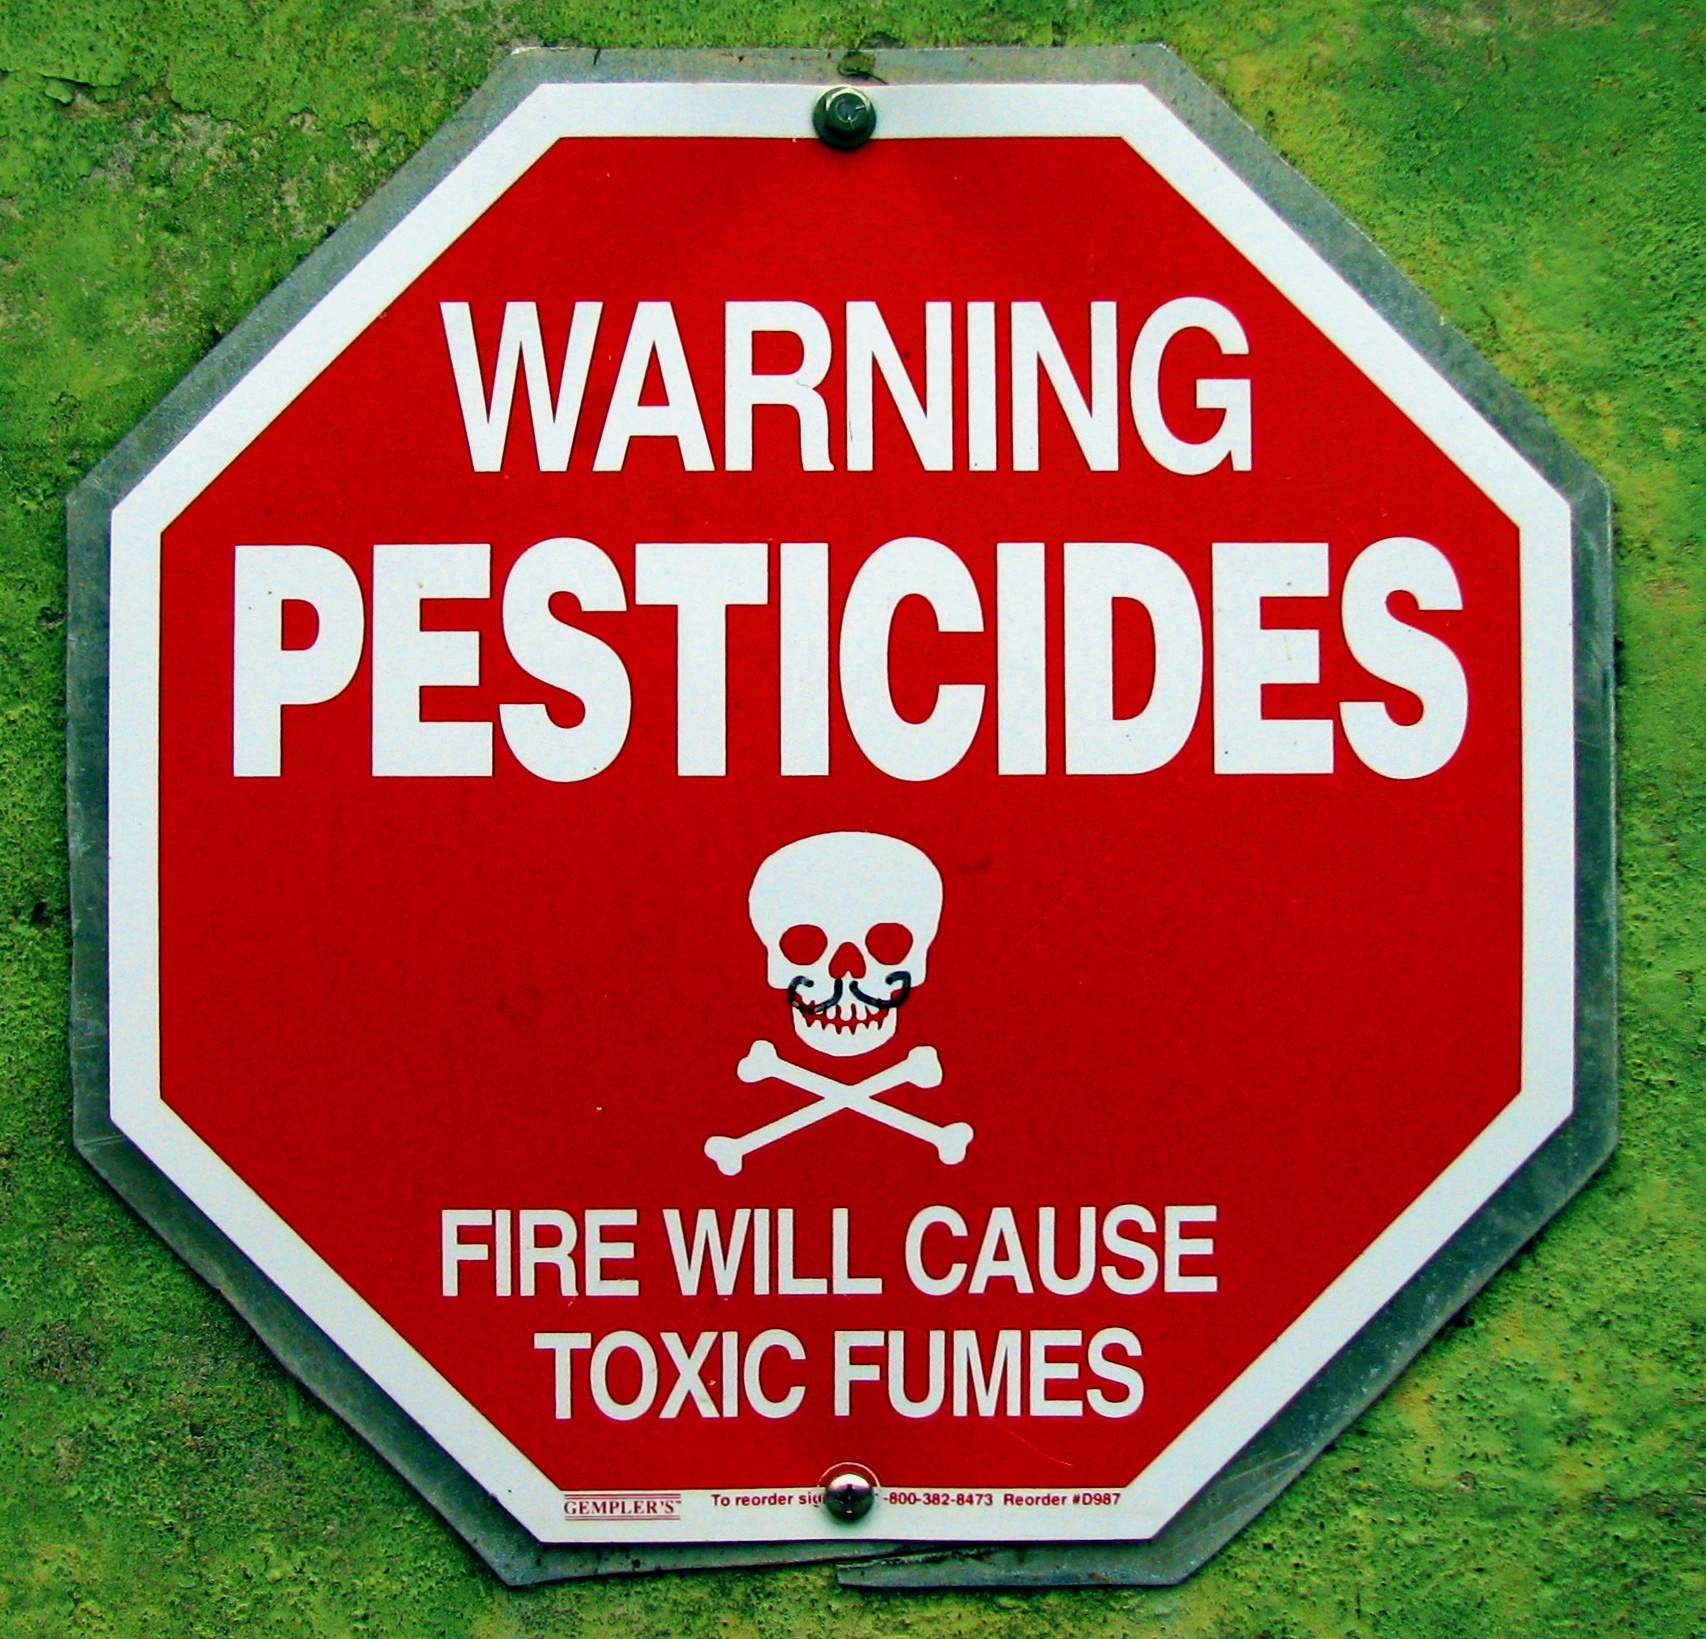 Weed Pesticides